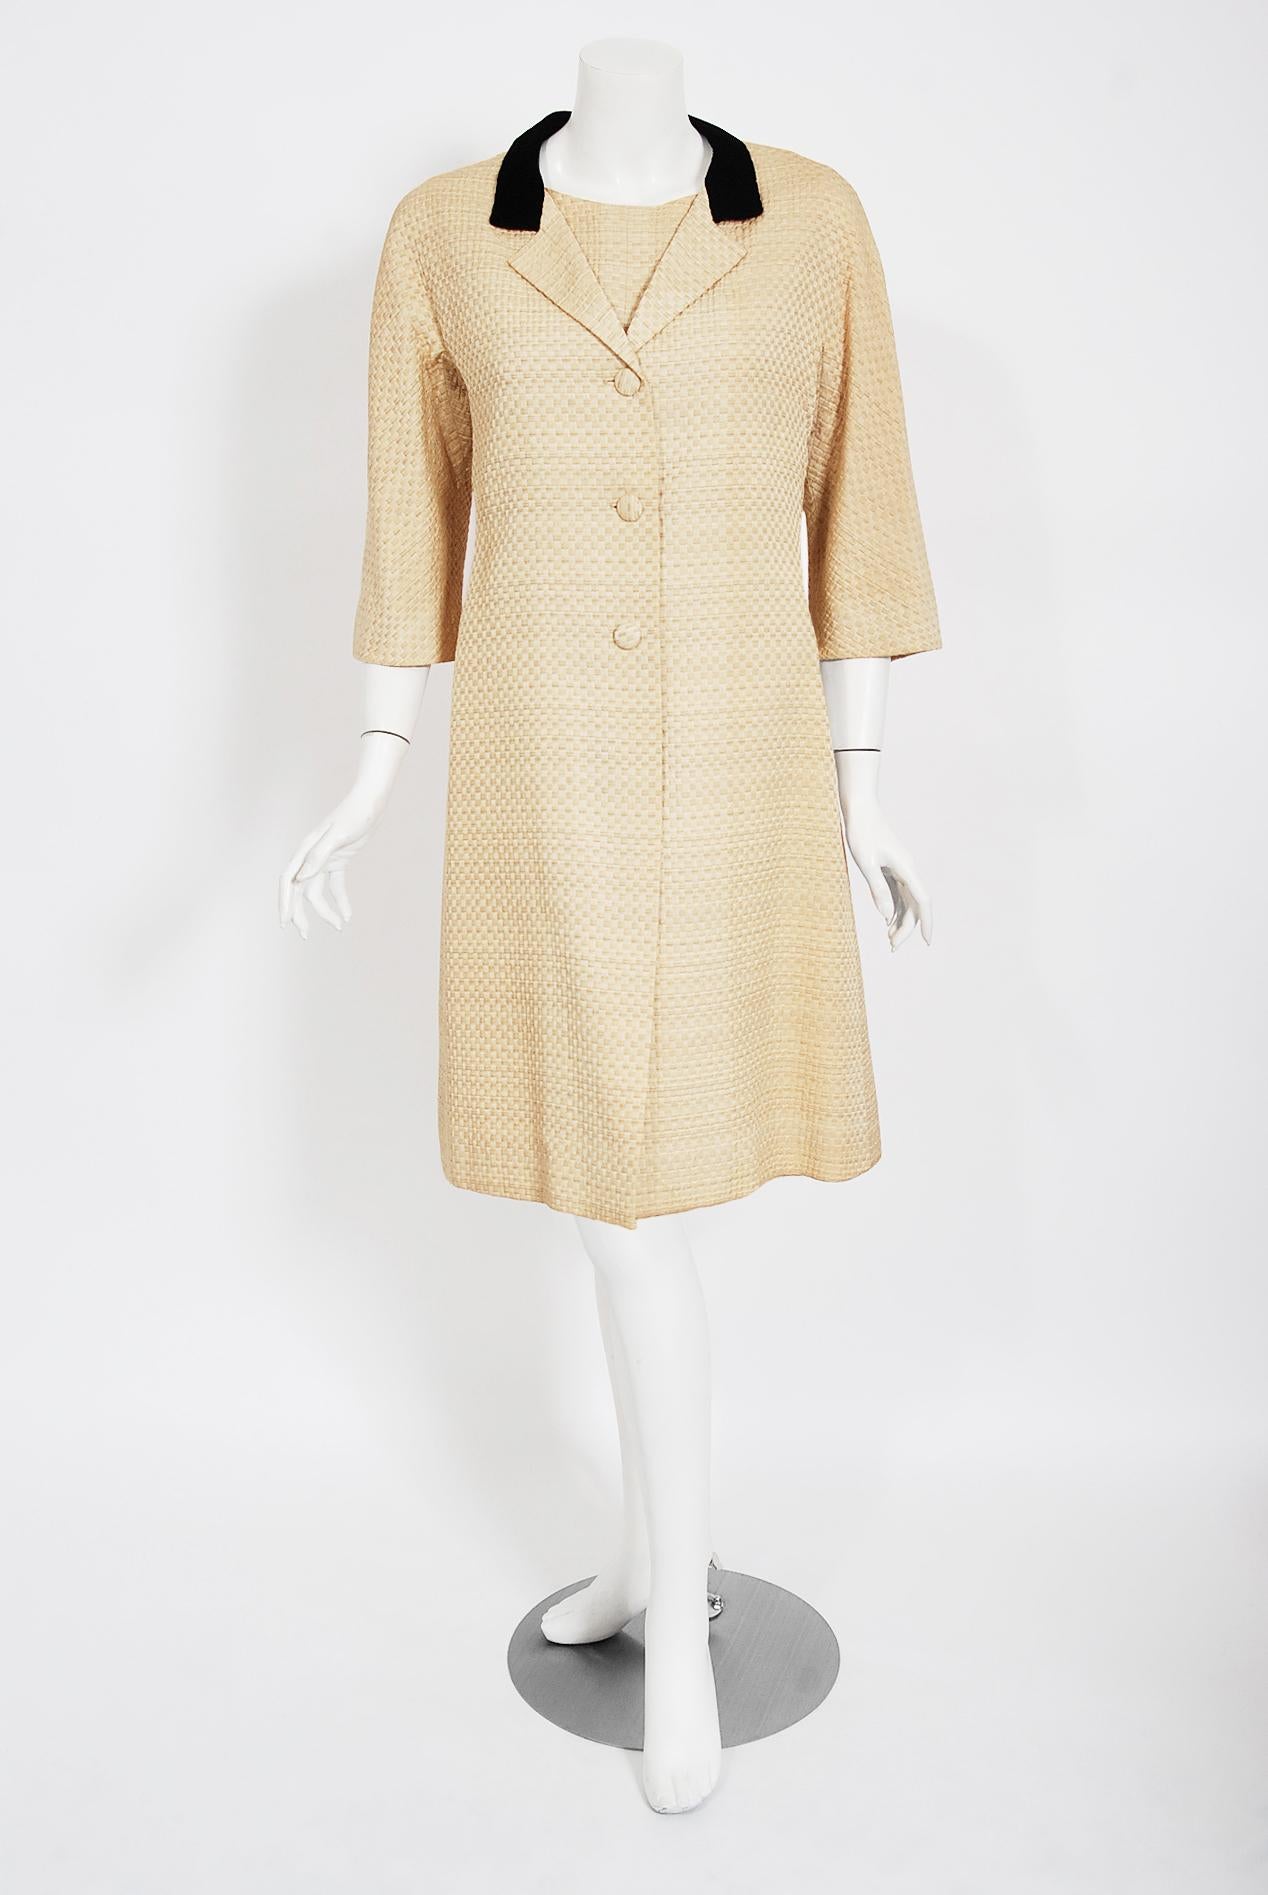 Stunning Balenciaga haute couture beige textured-silk cocktail dress with matching jacket dating back to 1965. Cristobal Balenciaga began his life's work in fashion at a very young age. It is fabled that the Marquesa de Casa Torres, who was so taken